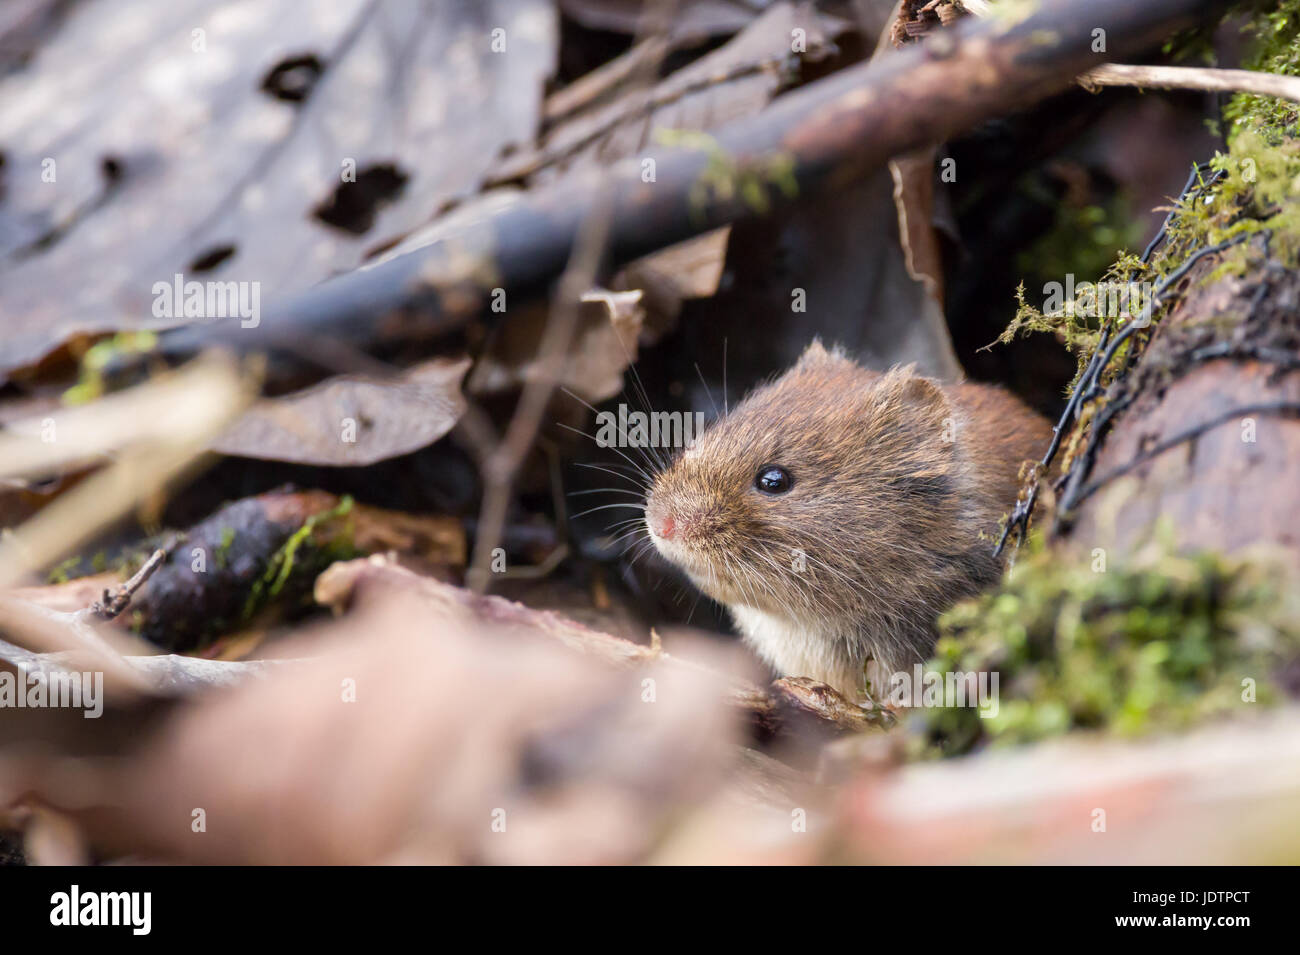 A water vole looking out, waiting in the bush Stock Photo